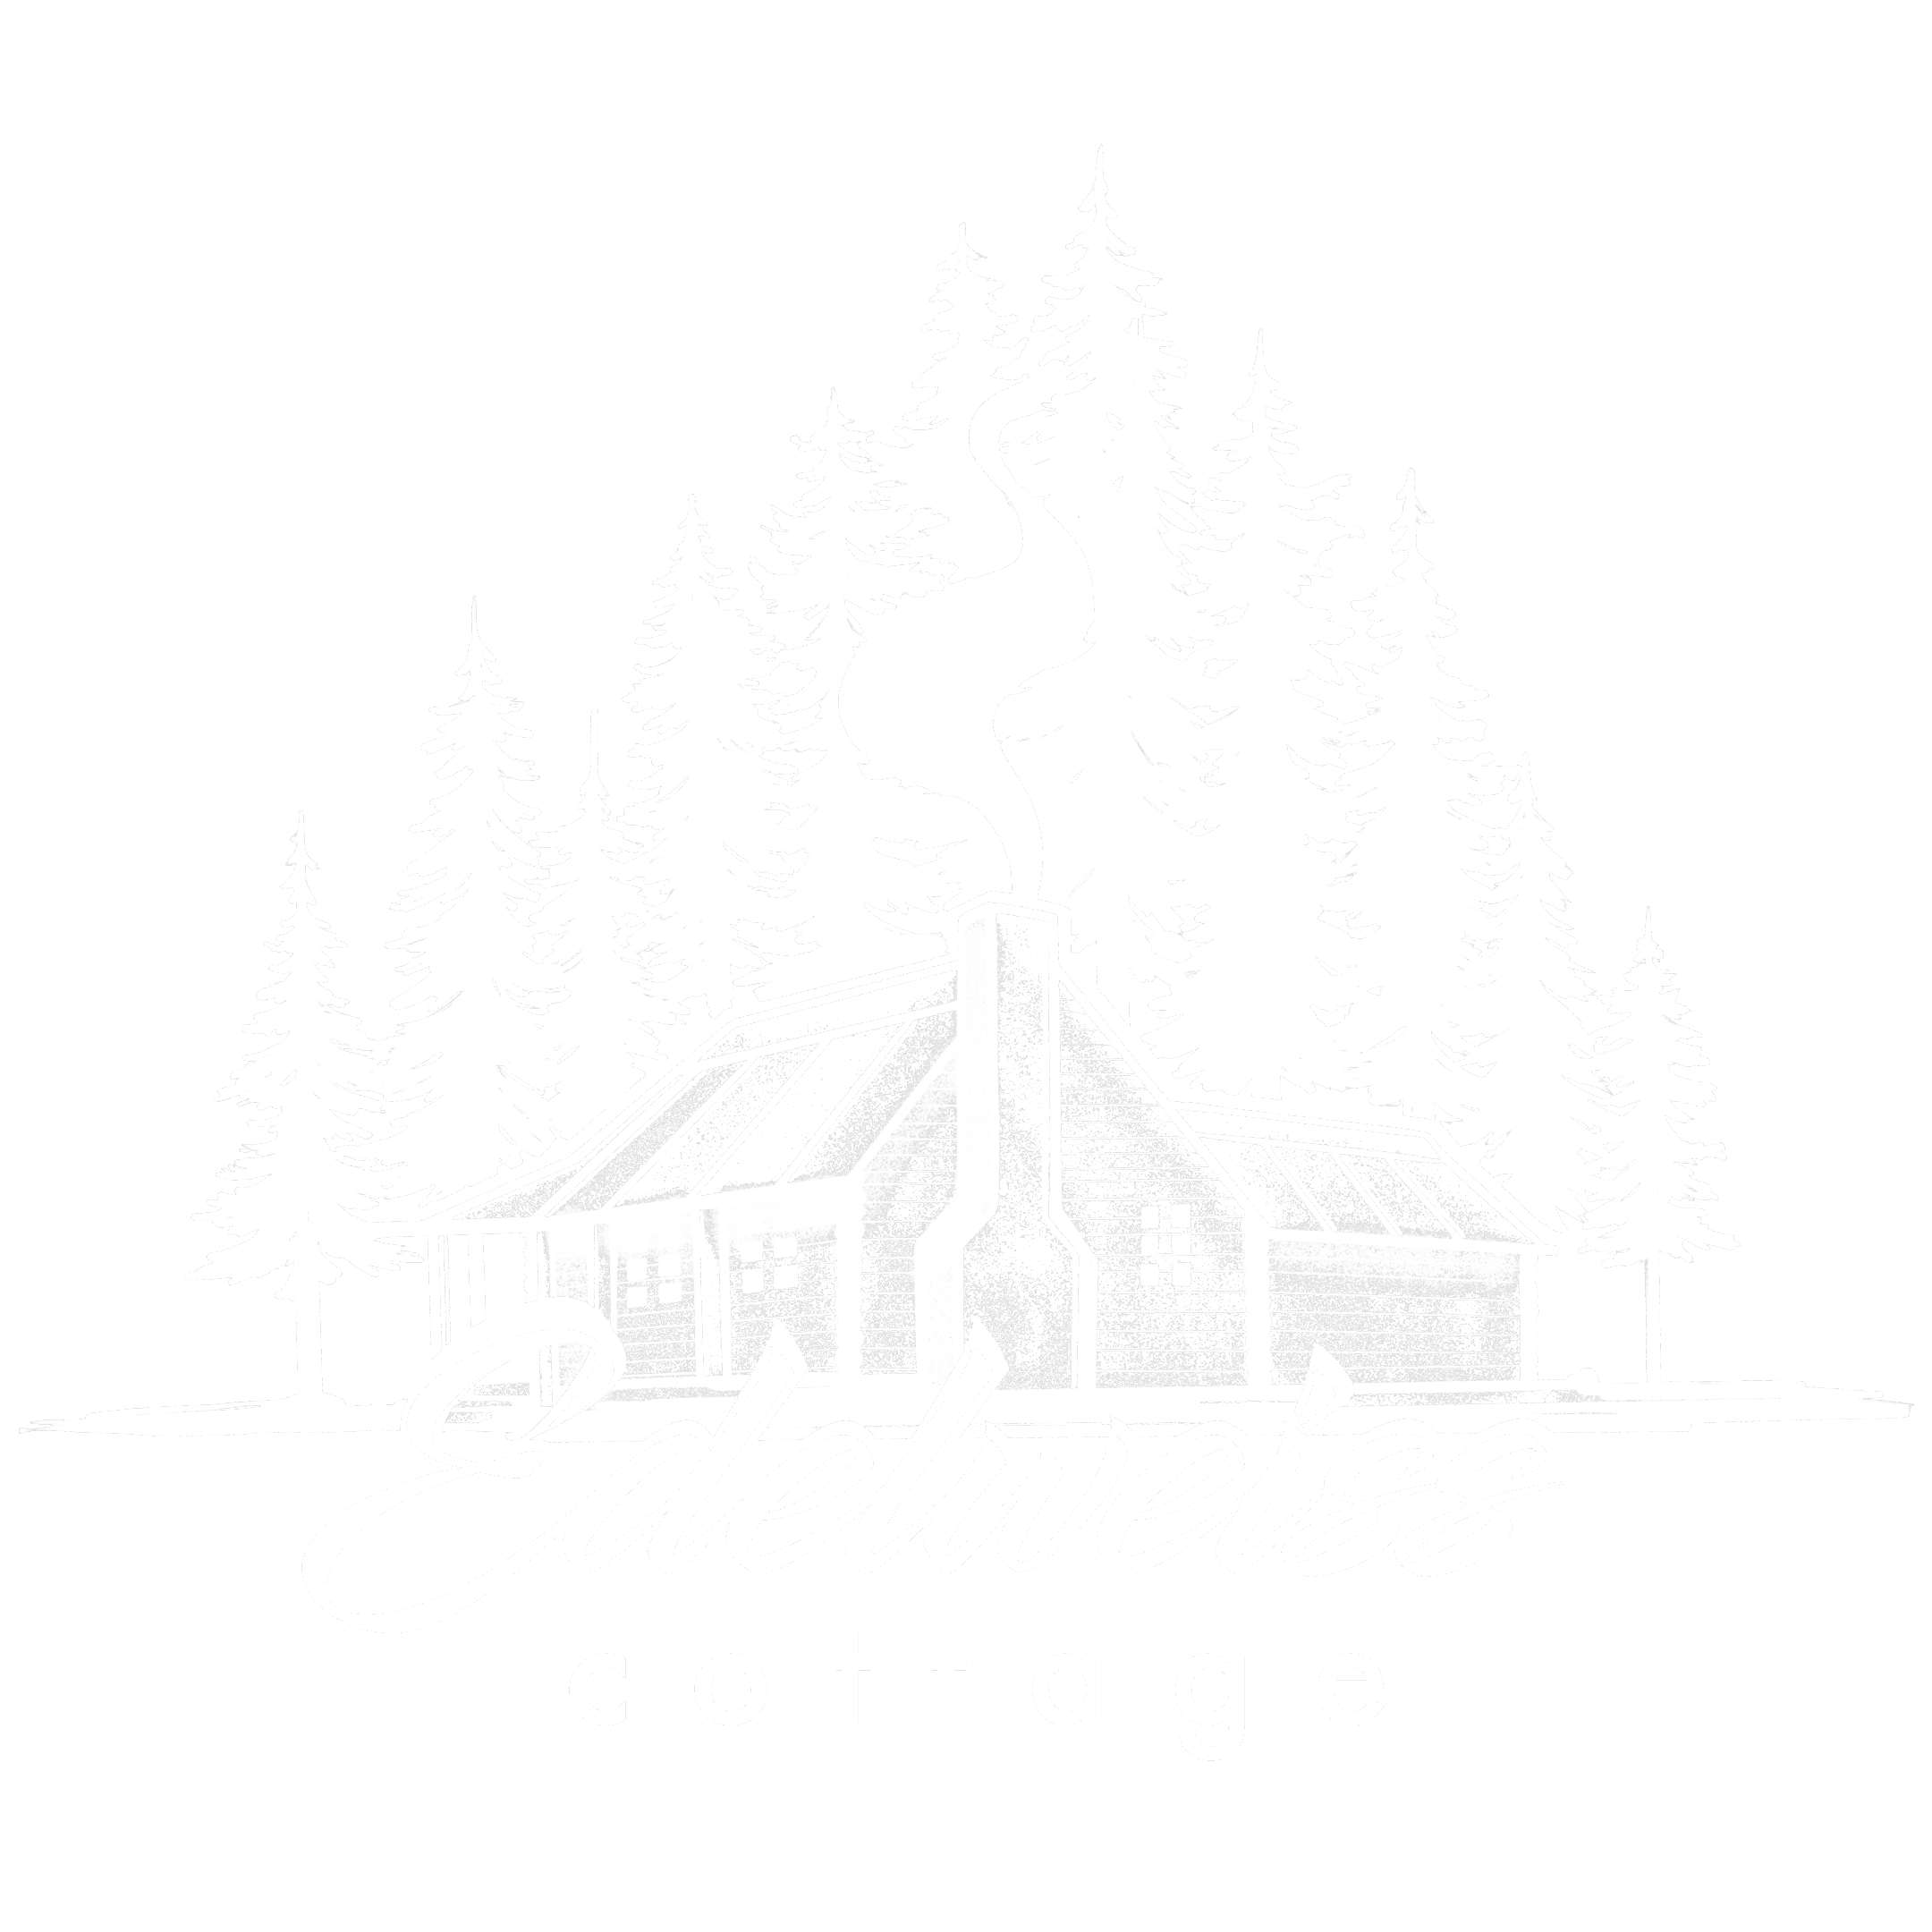 Edelweiss Cottage